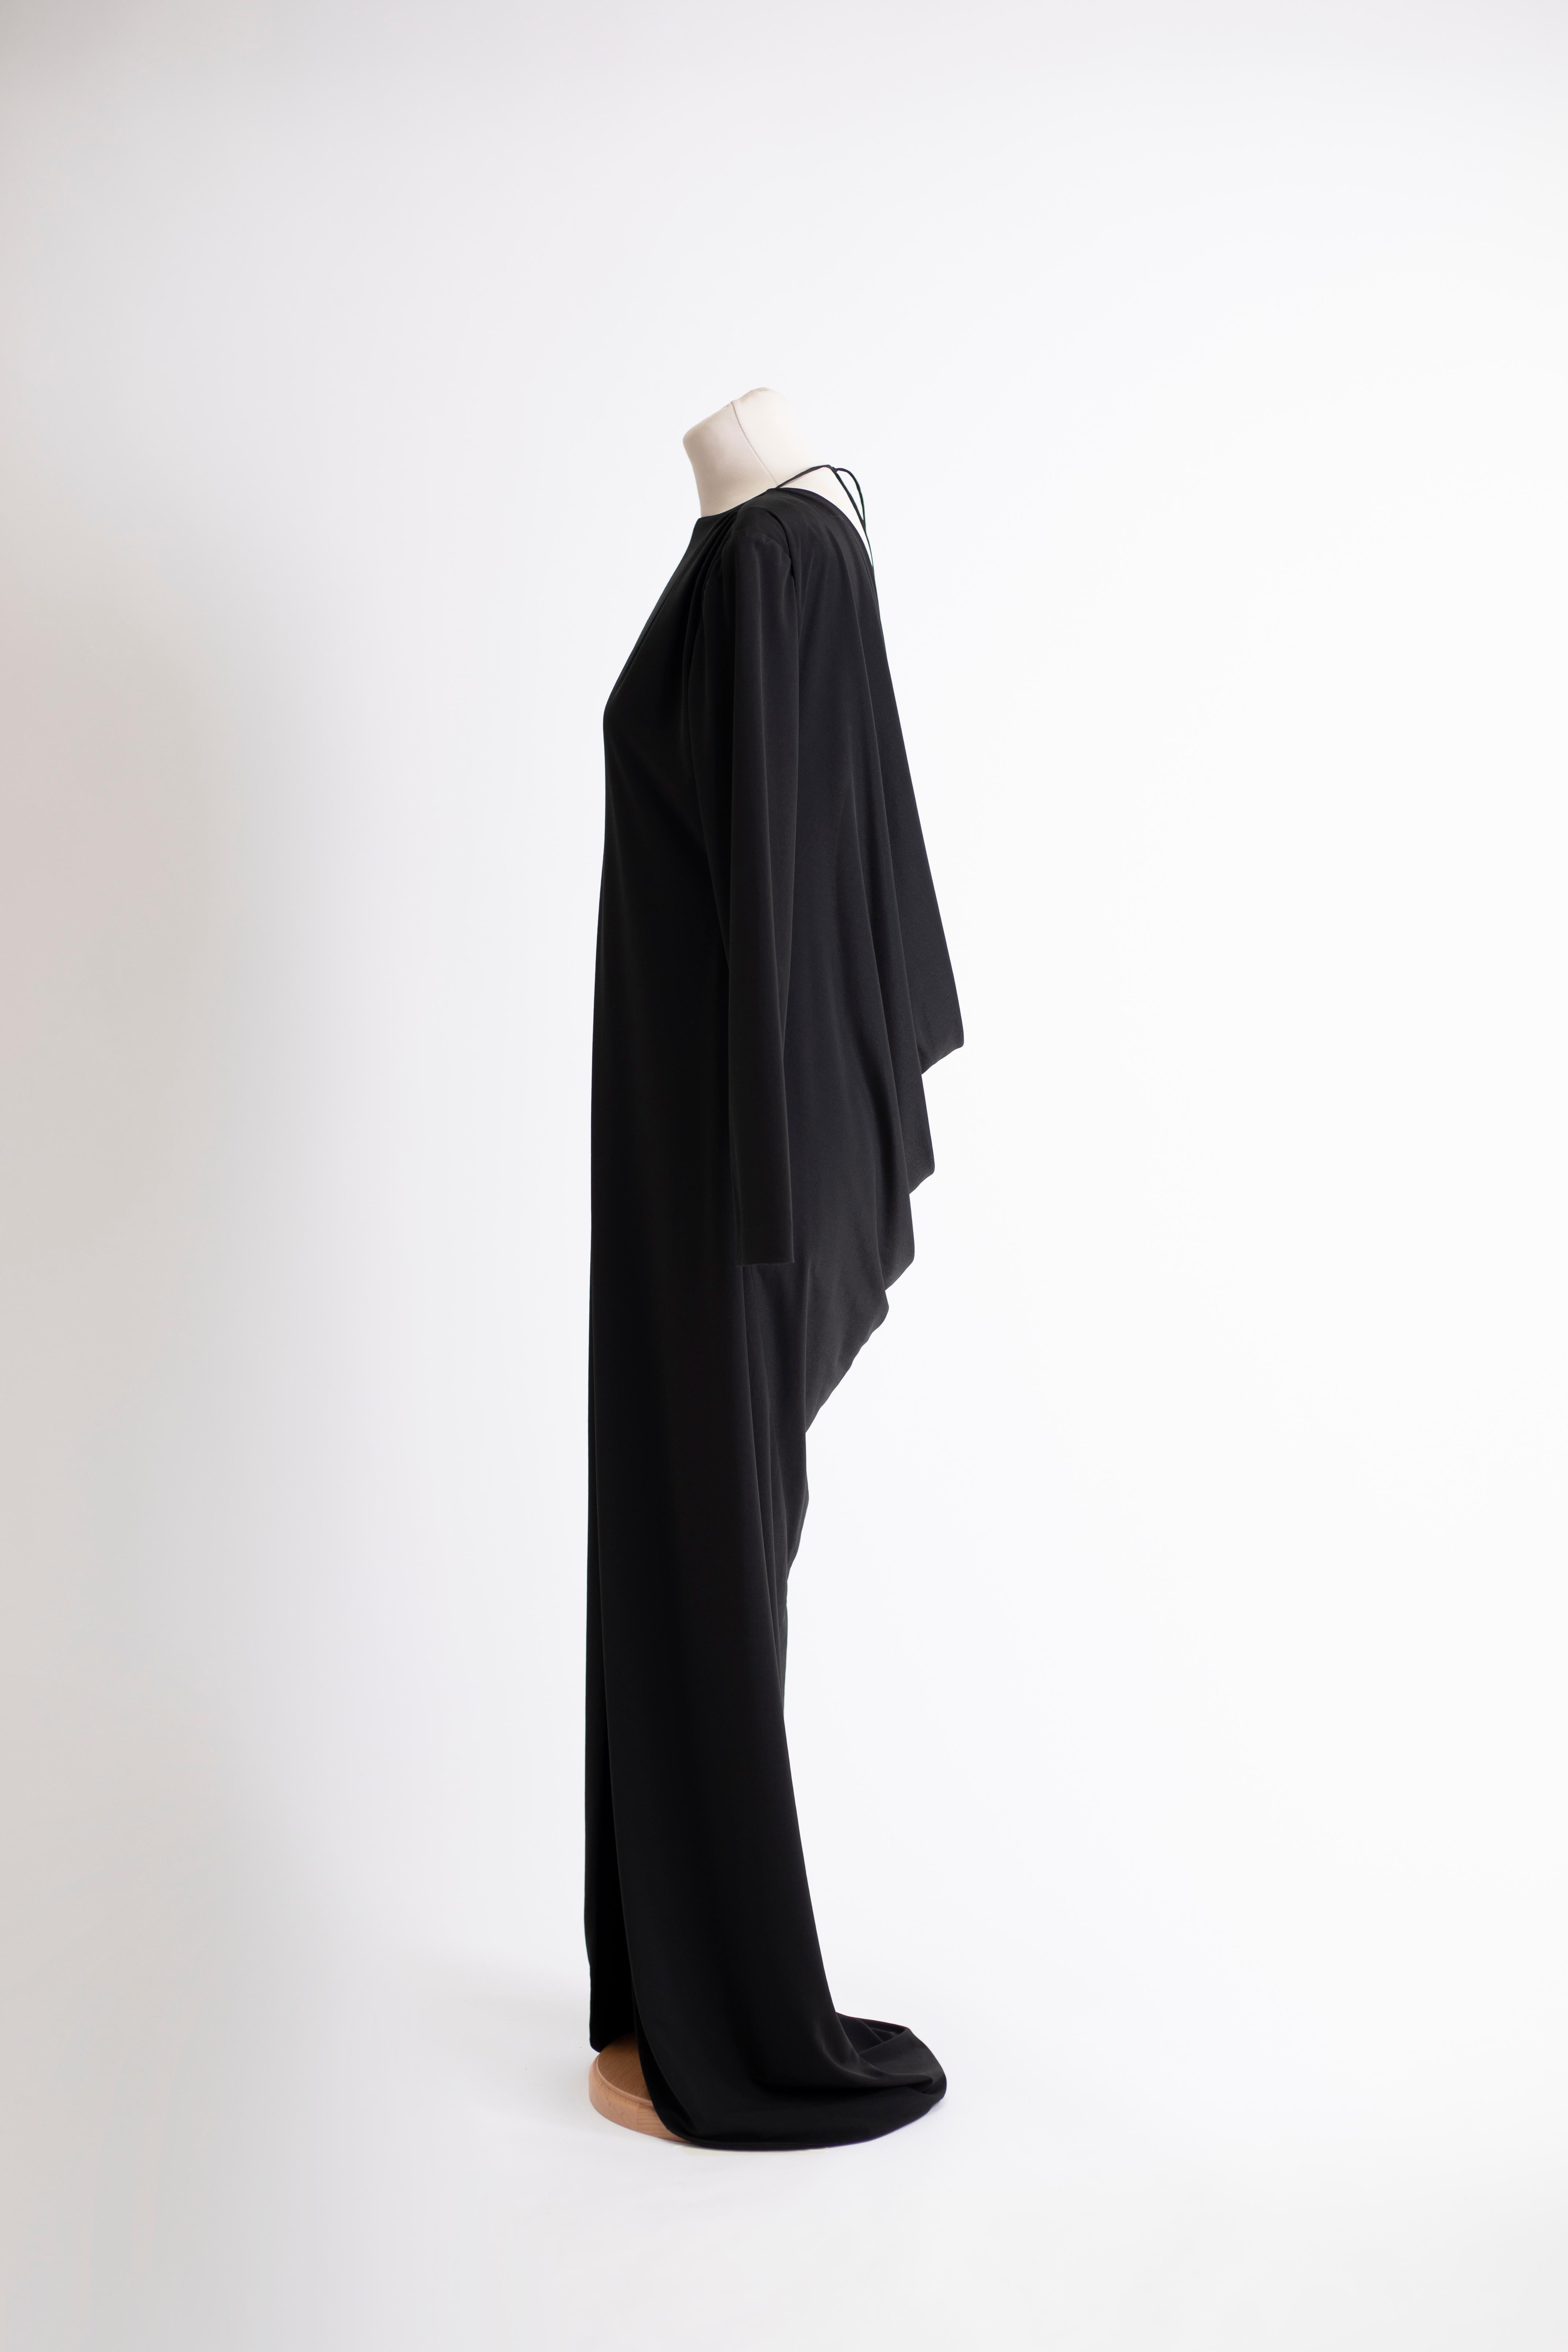 1980s Dimitri Kritsas long black dress with wide shawl neckline and low cut back. Rounded high slit in front with fitted long sleeves.

Evening dress Size: M

Waist: 88 cm
Length: 142 cm
Bust: 100 cm